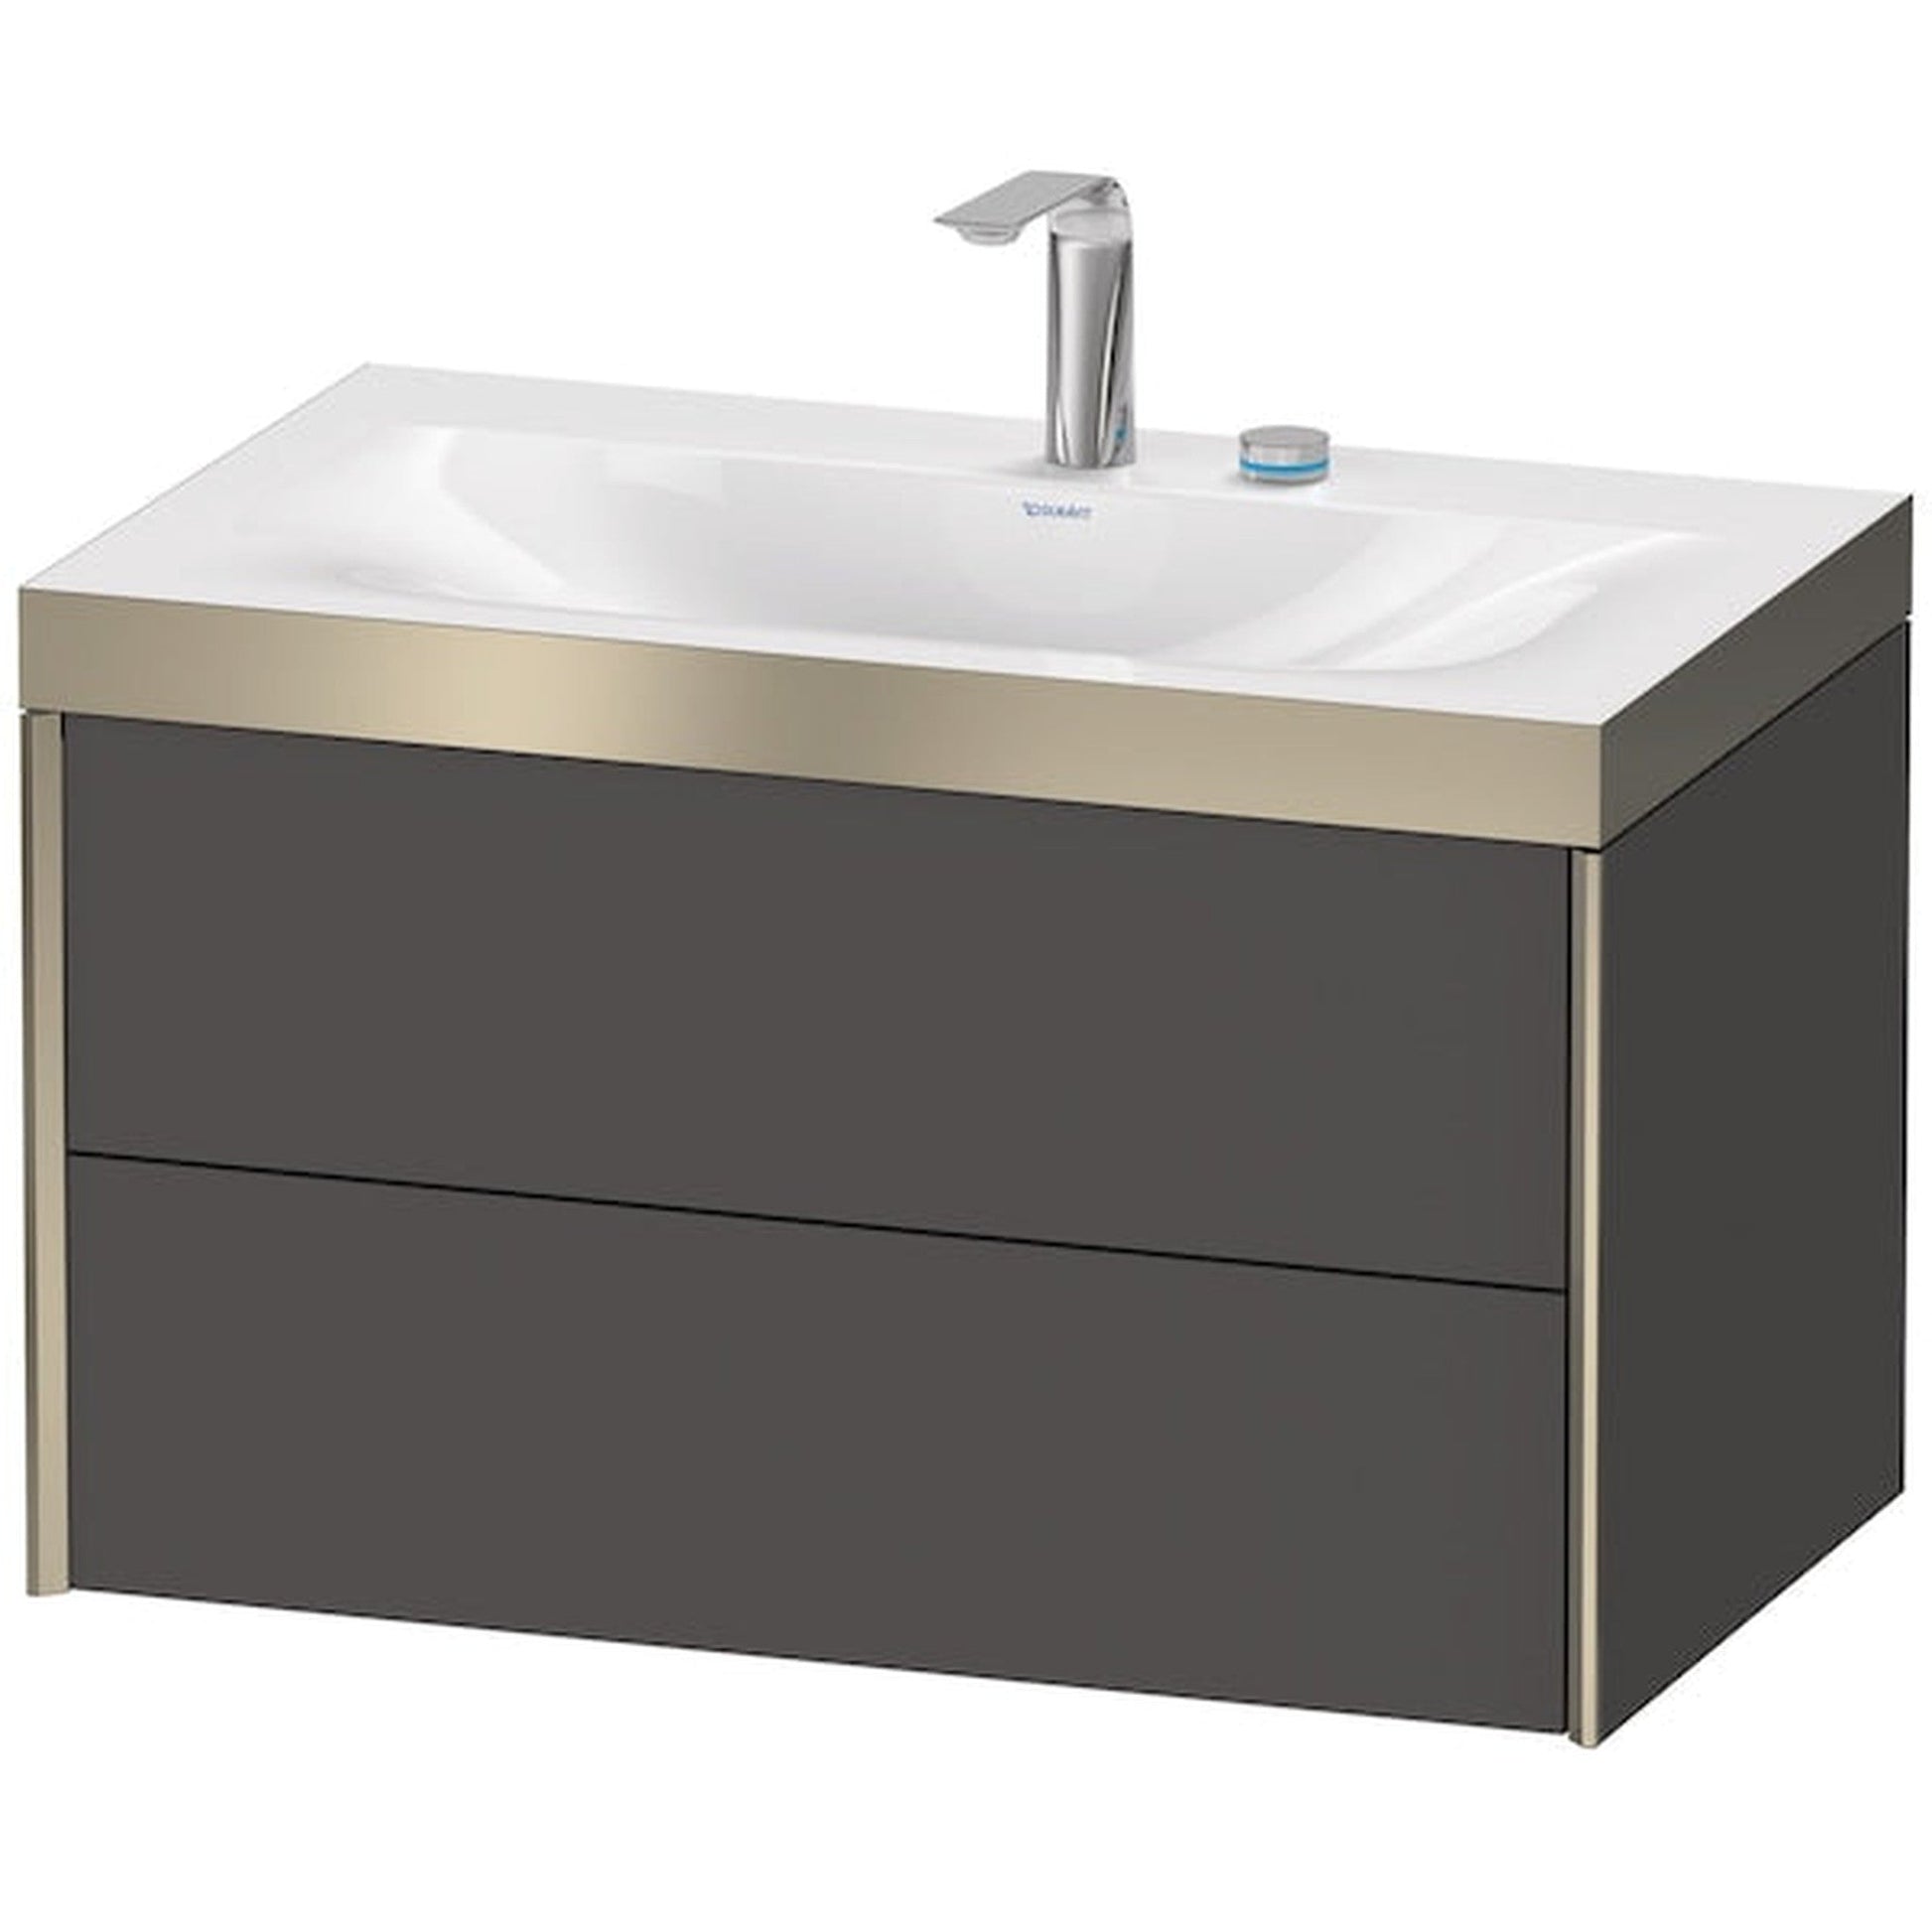 Duravit Xviu 31" x 20" x 19" Two Drawer C-Bonded Wall-Mount Vanity Kit With Two Tap Holes, Graphite (XV4615EB149P)